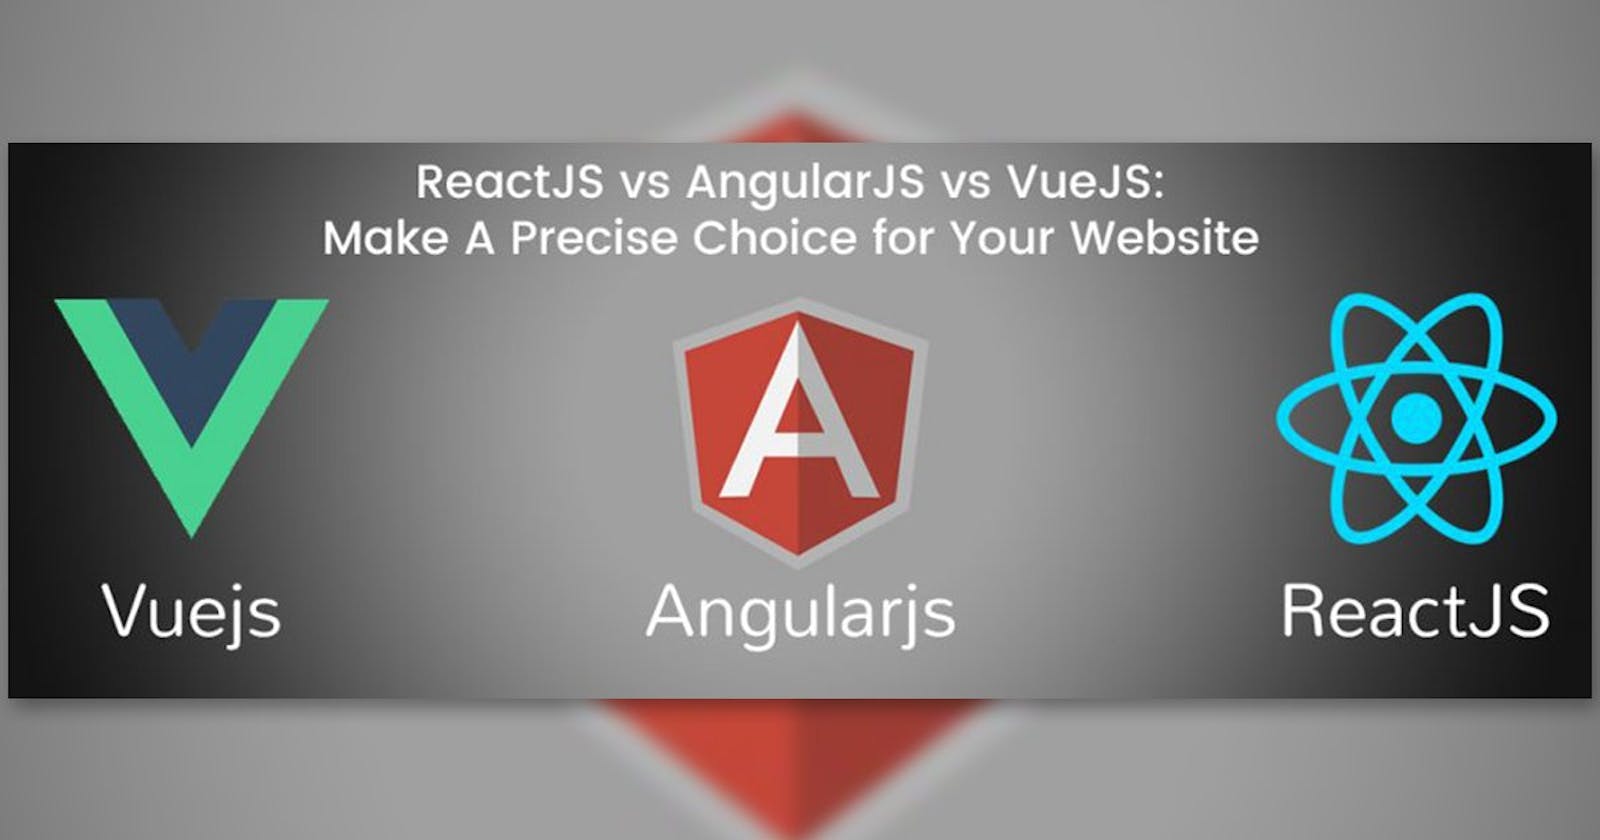 ReactJS vs AngularJS vs VueJS : Which is Sensible to Use in 2018?